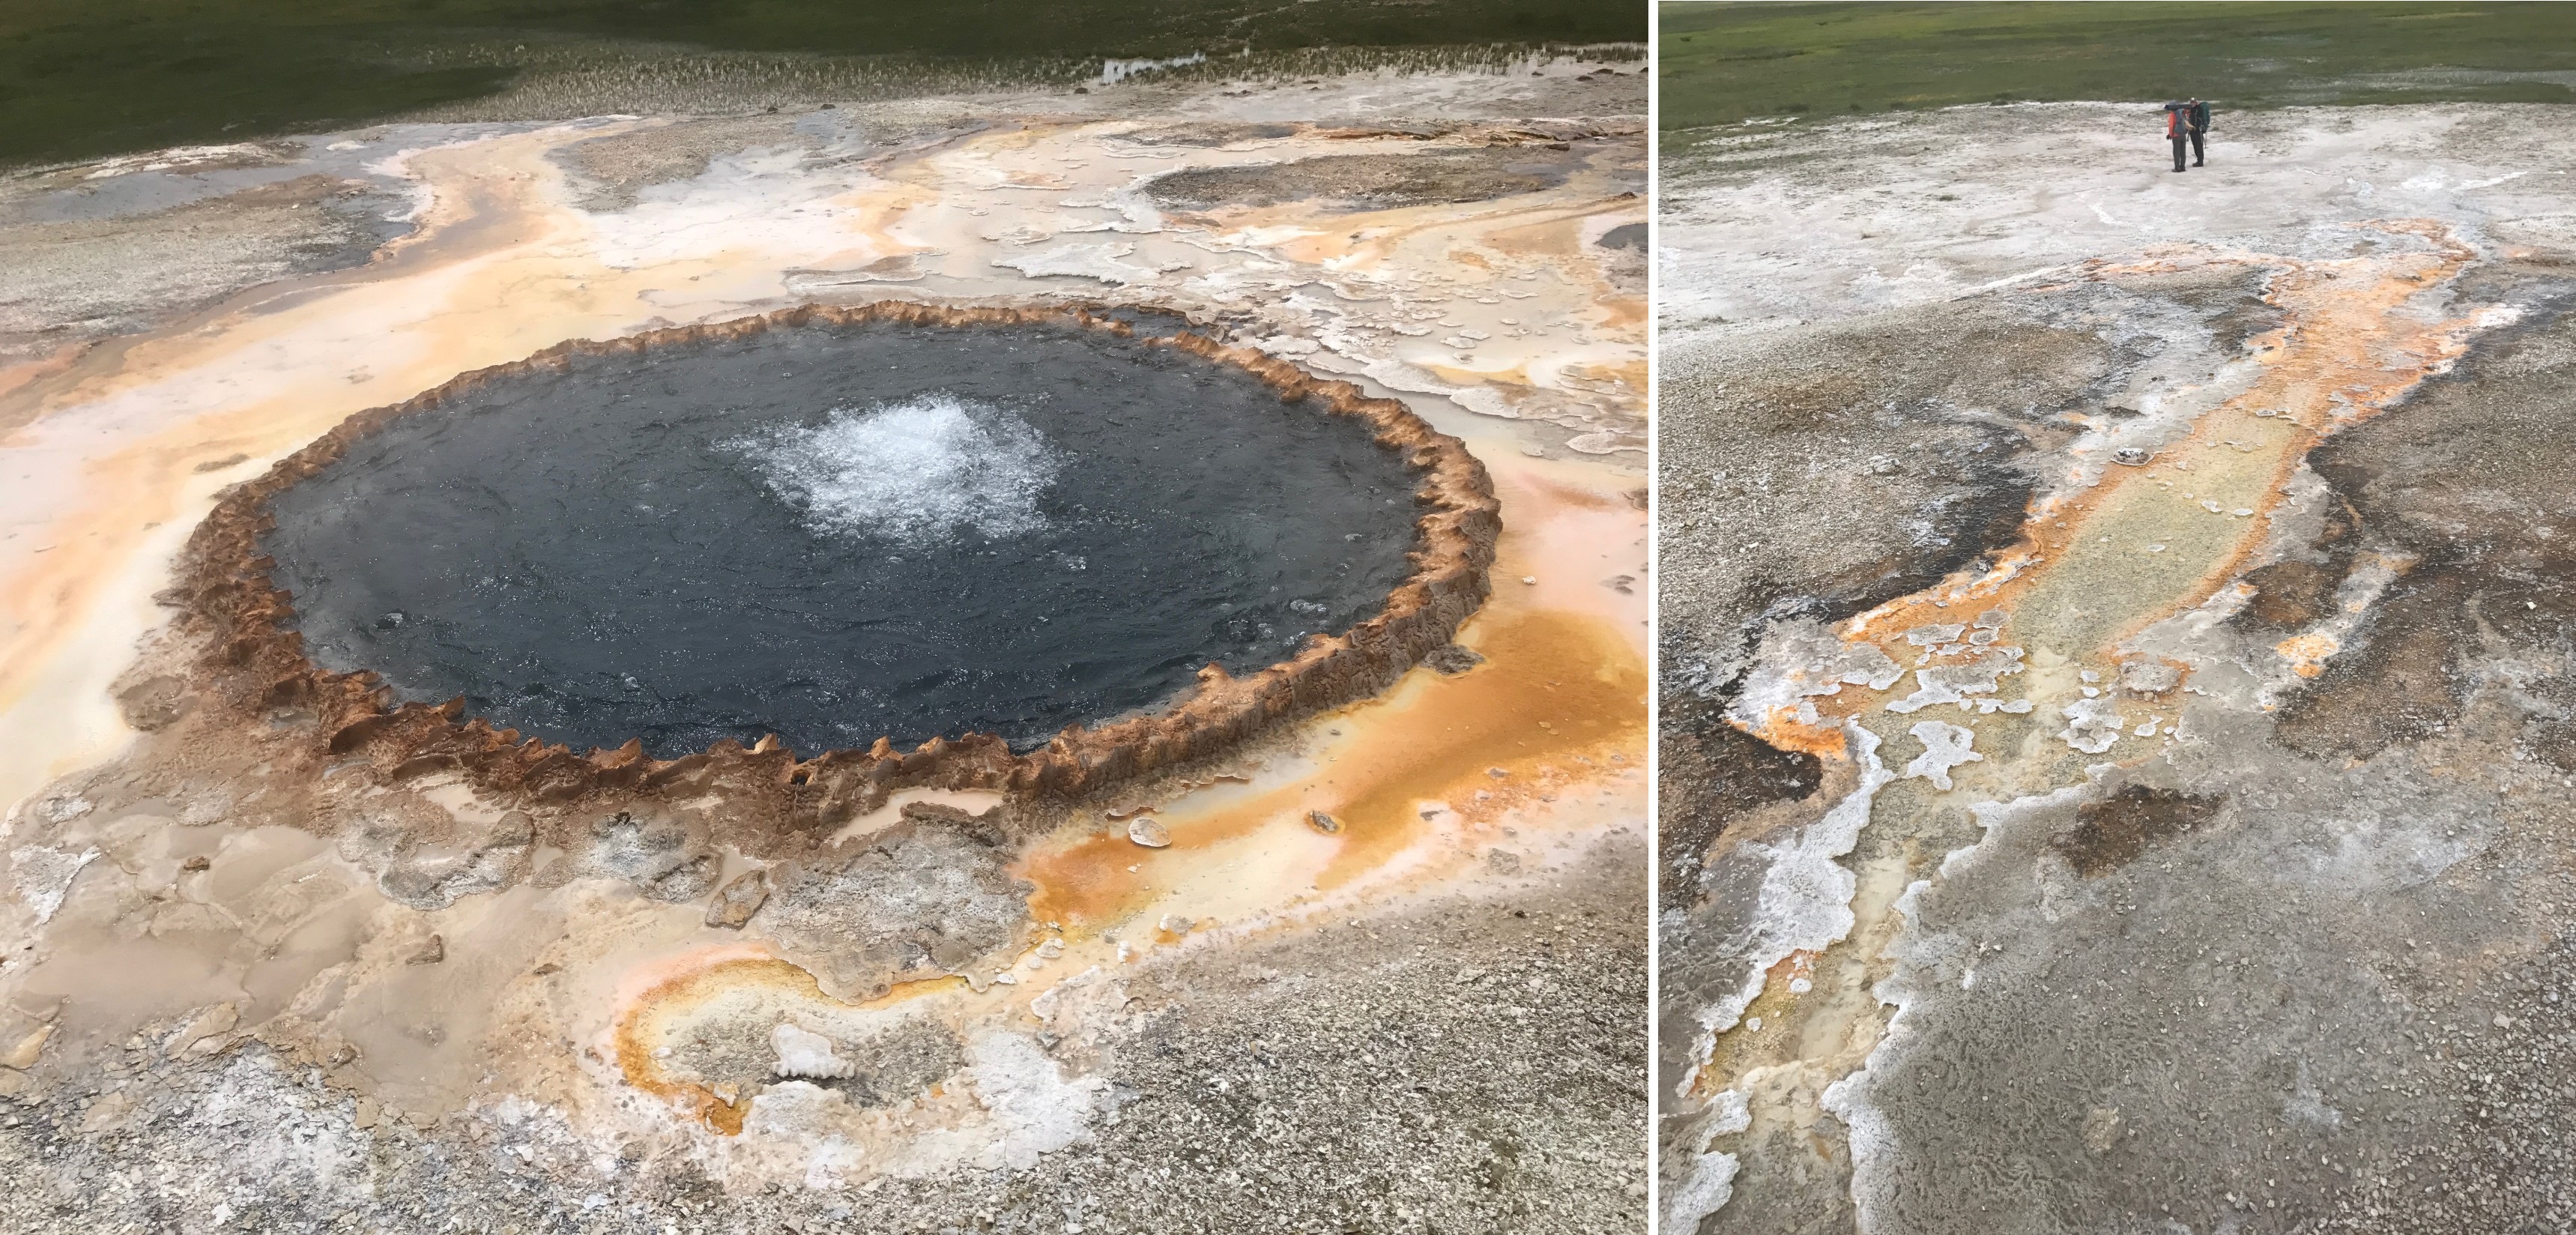 hot spring environments in Yellowstone National Park